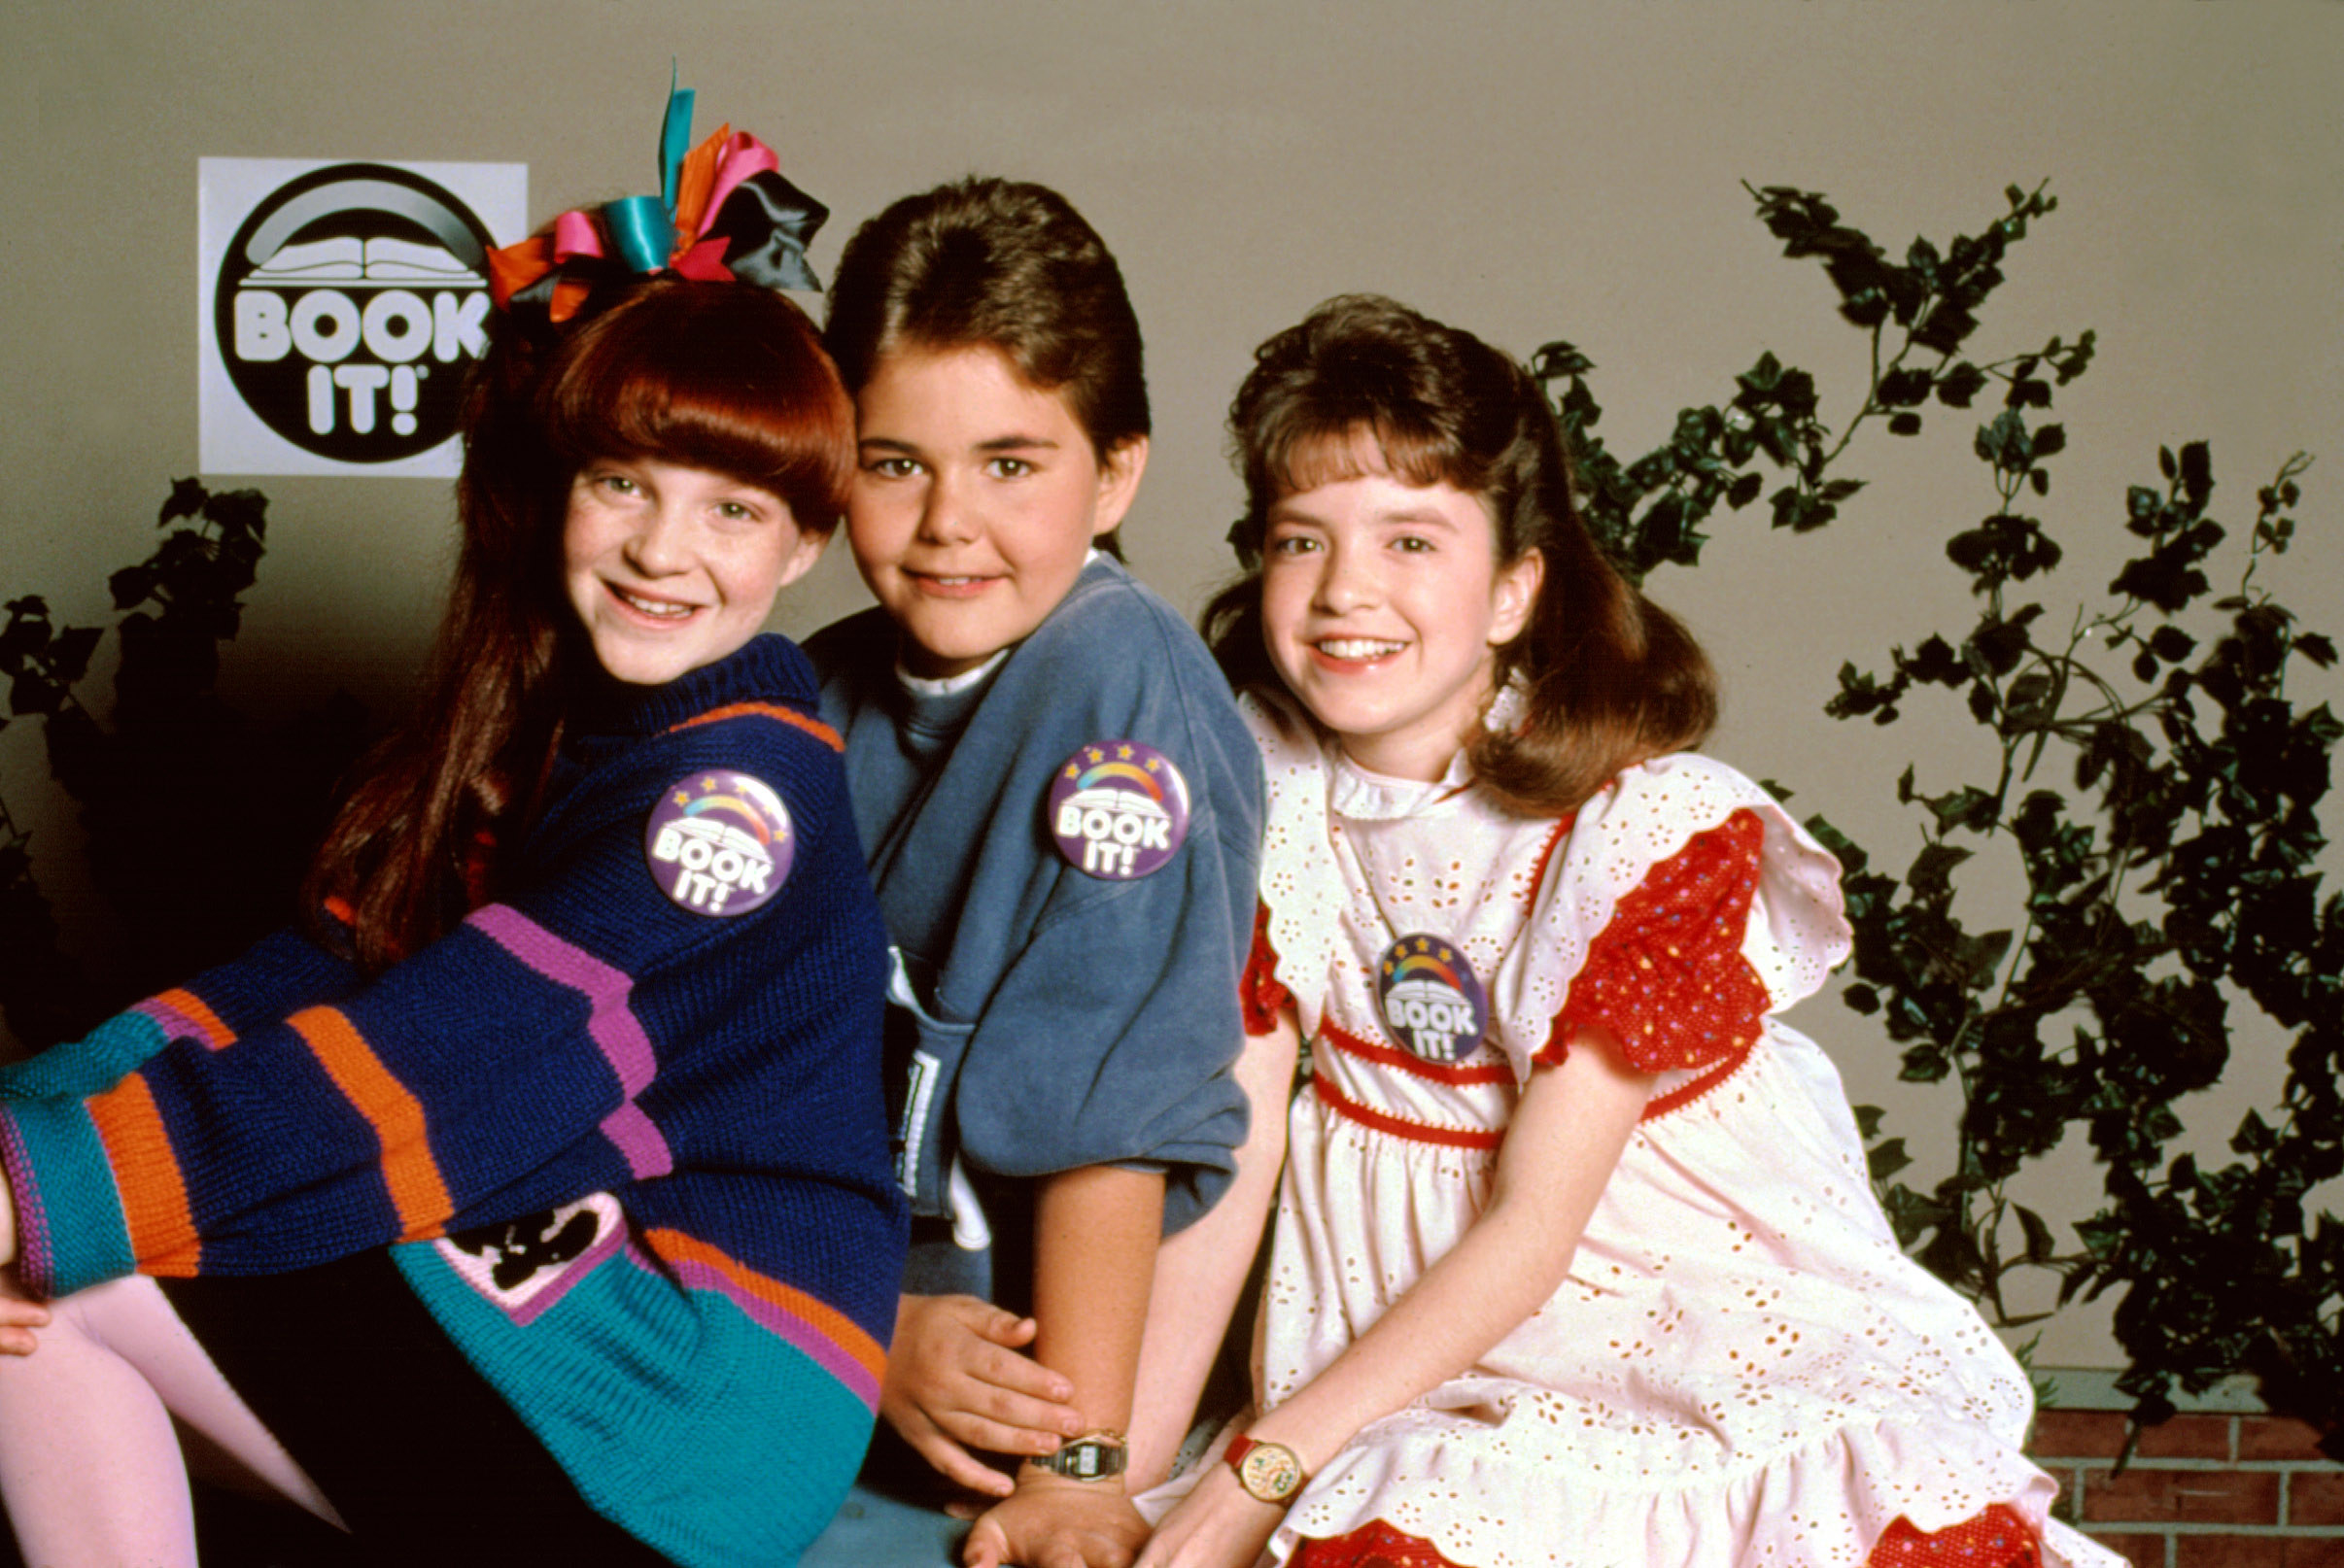 Three of the kid stars from Small Wonder promoting Book It!